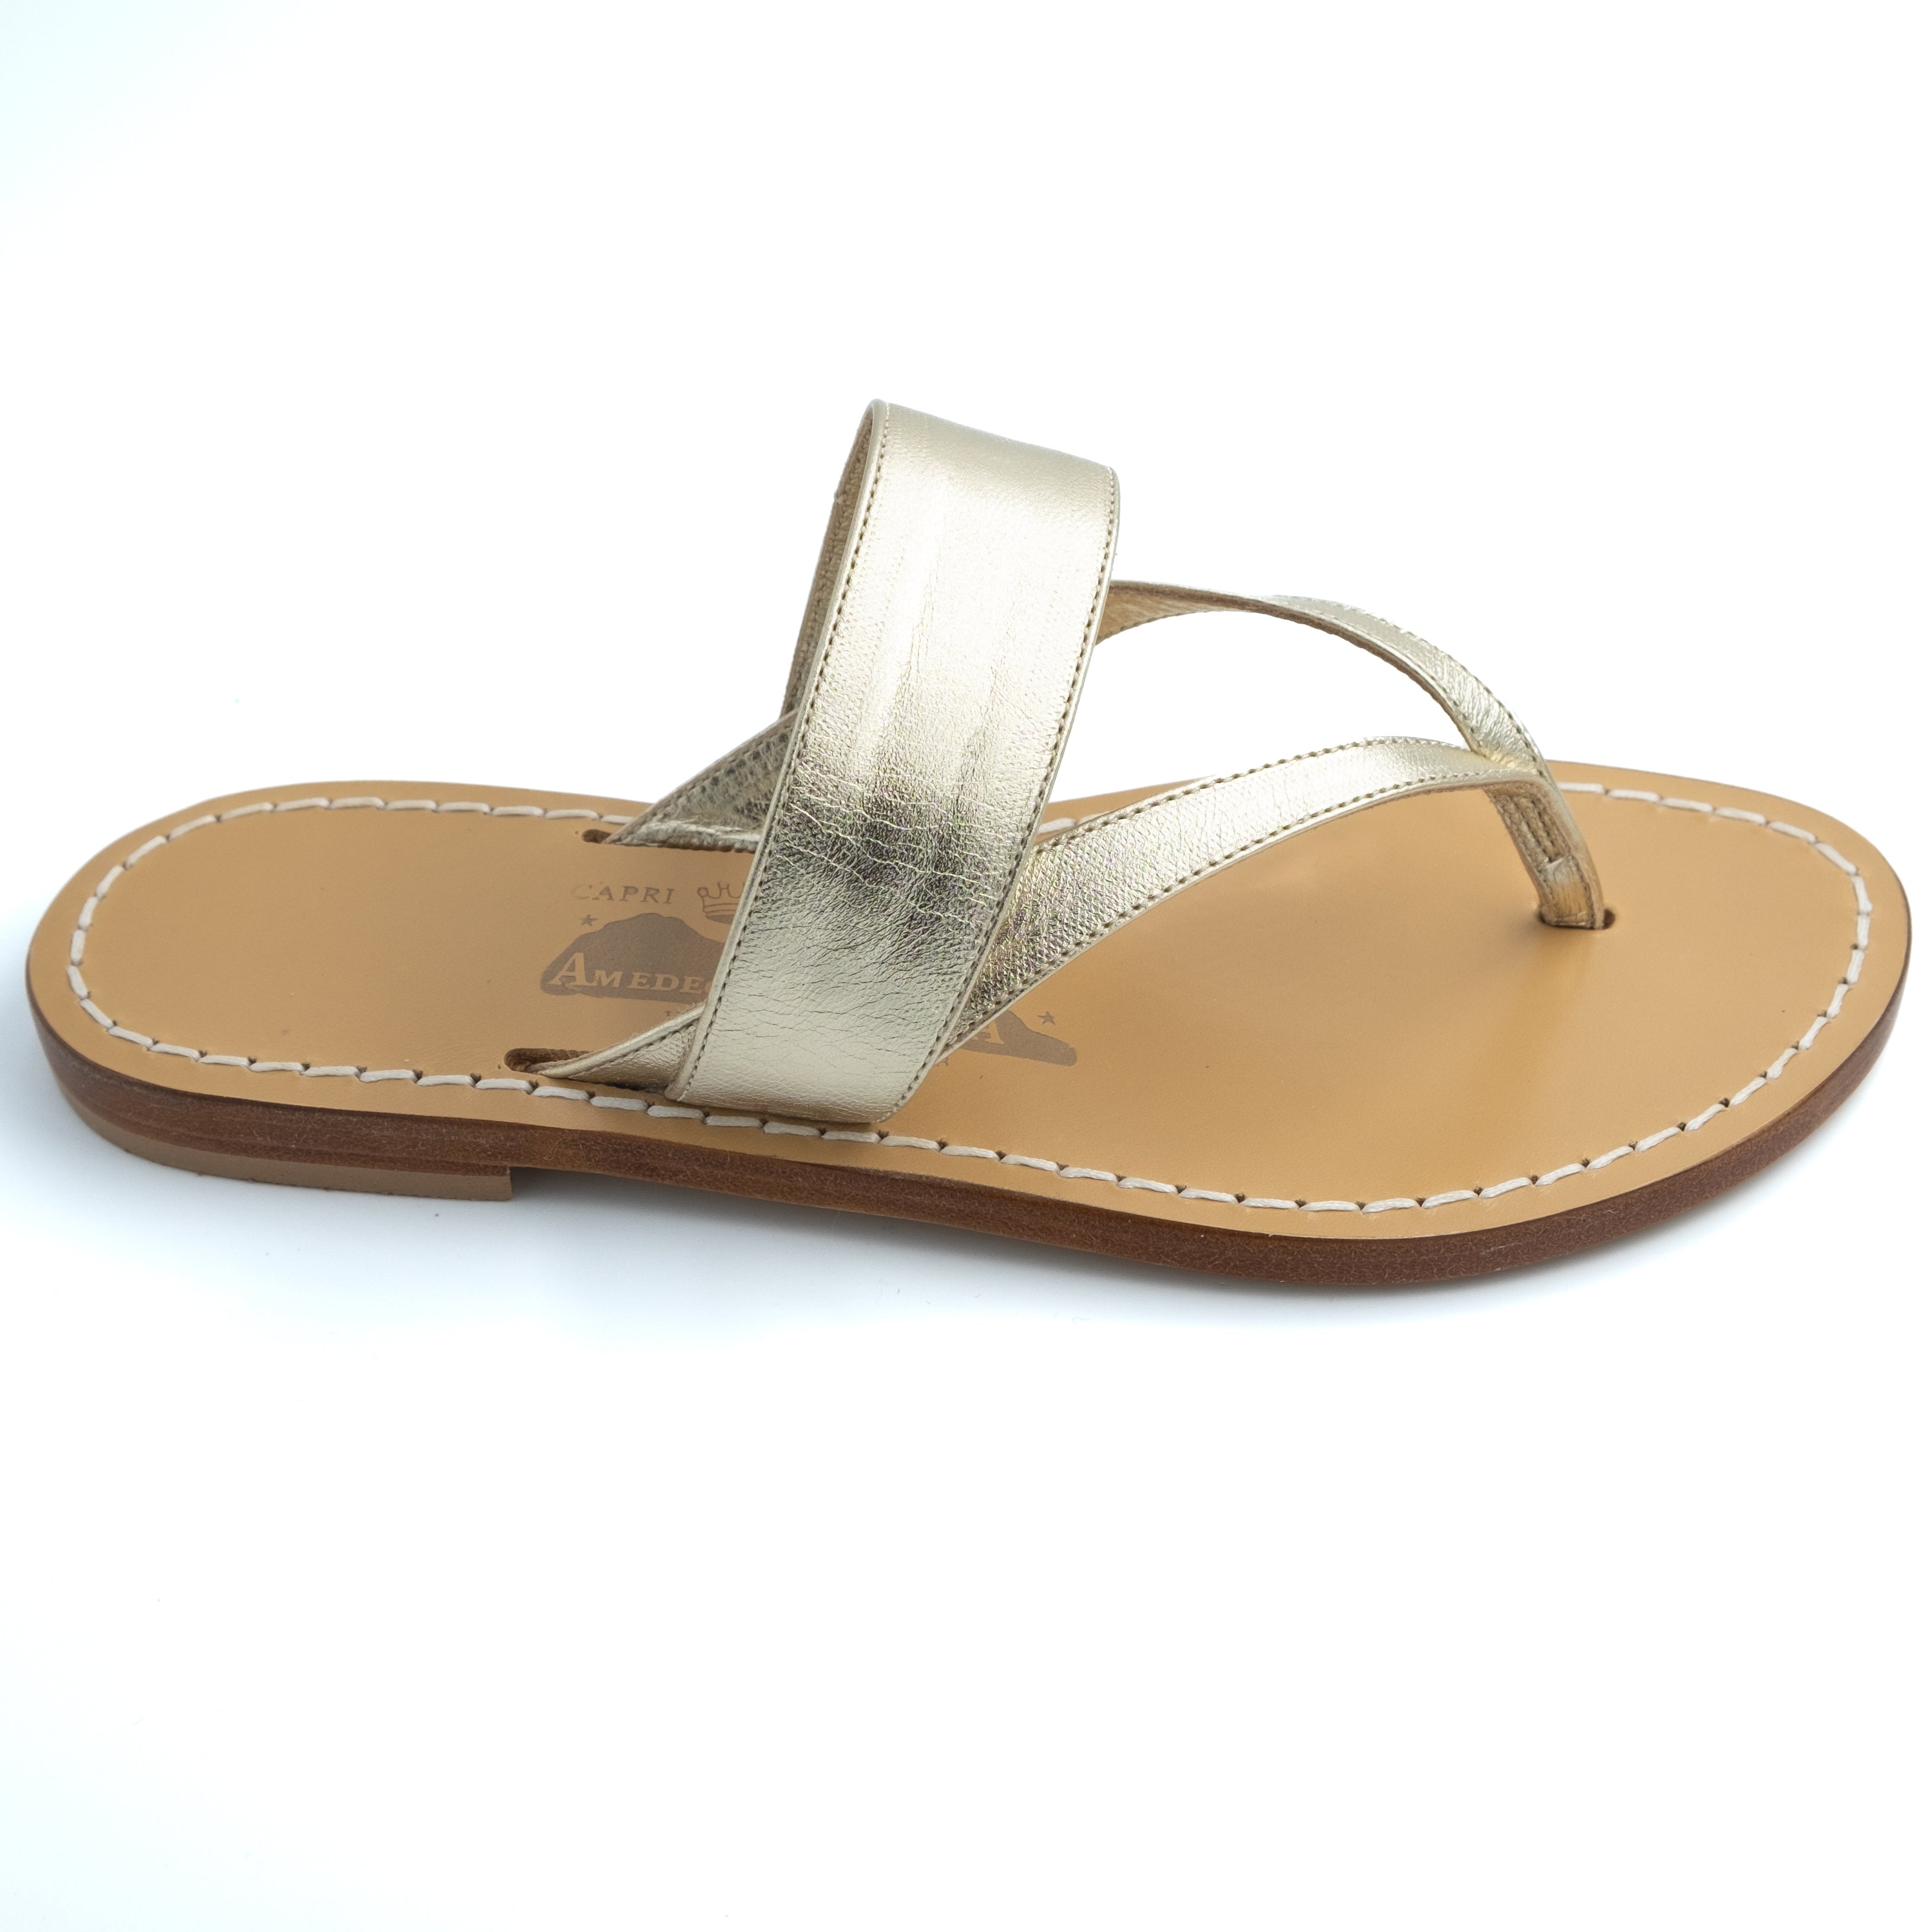 Marilyn - Capri Handcrafted Sandals from Italy – Canfora.com